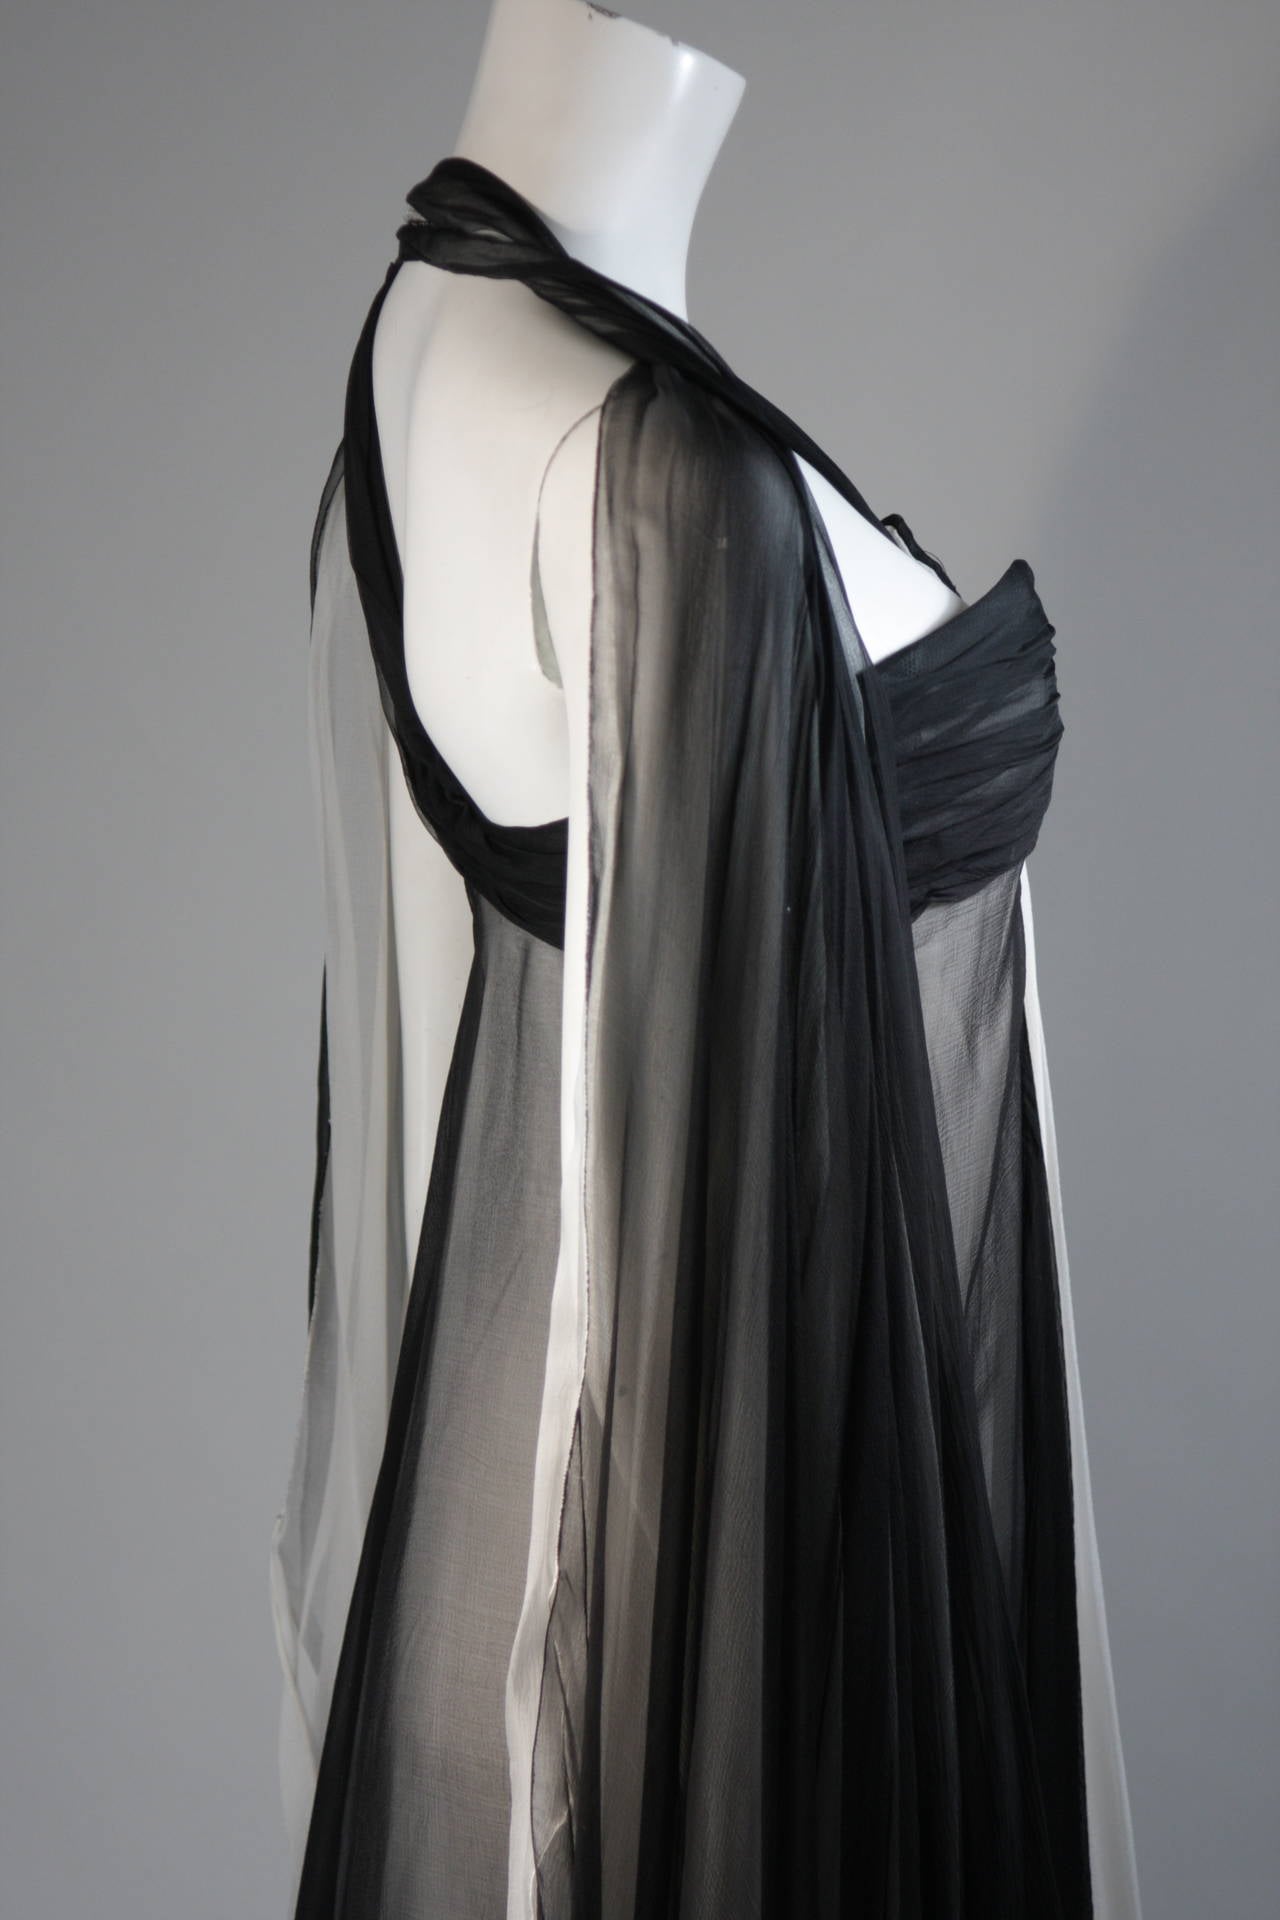 Jacqueline De Ribes Black and Ivory Silk Chiffon Gown Size For Sale 3